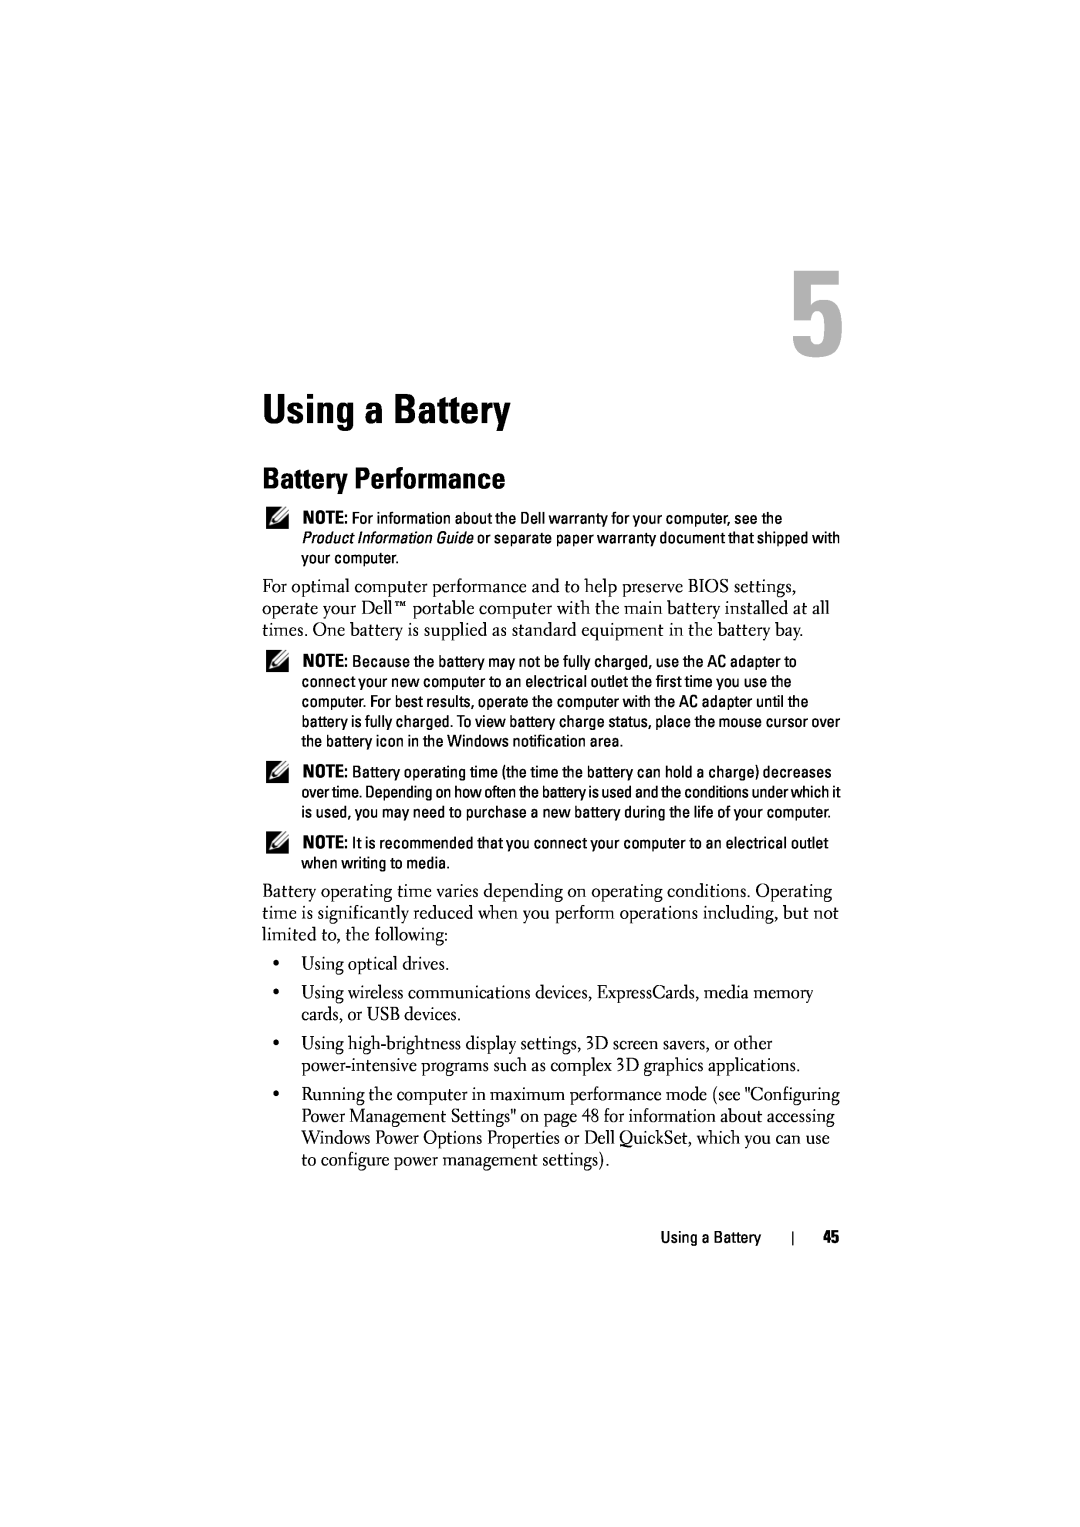 Dell 1526, 1525 owner manual Using a Battery, Battery Performance 